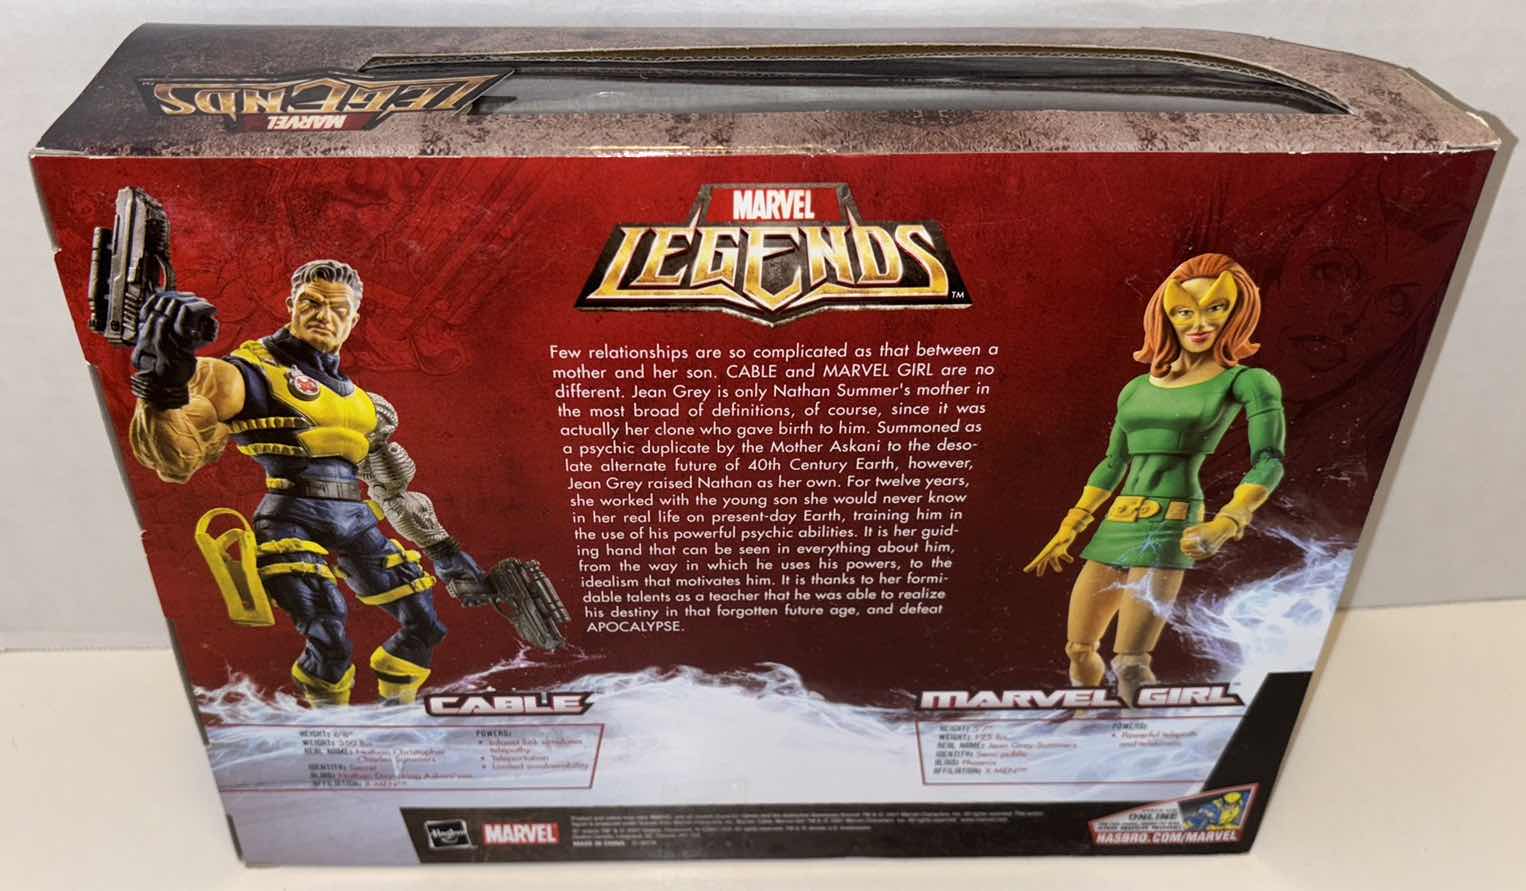 Photo 4 of NEW HASBRO MARVEL LEGENDS ACTION FIGURES & ACCESSORIES 2-PACK, “CABLE” & “MARVEL GIRL”  (WALMART EXCLUSIVE)